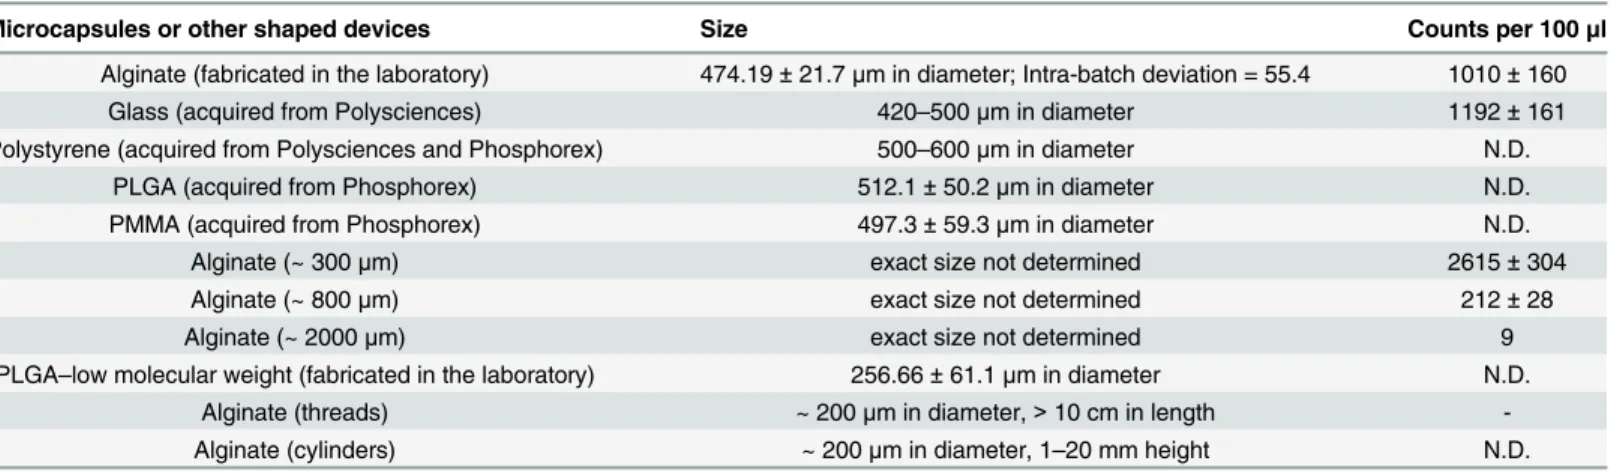 Table 1. Sizing and counts of microcapsules used as models for device implantation in the peritoneal cavity of mice.